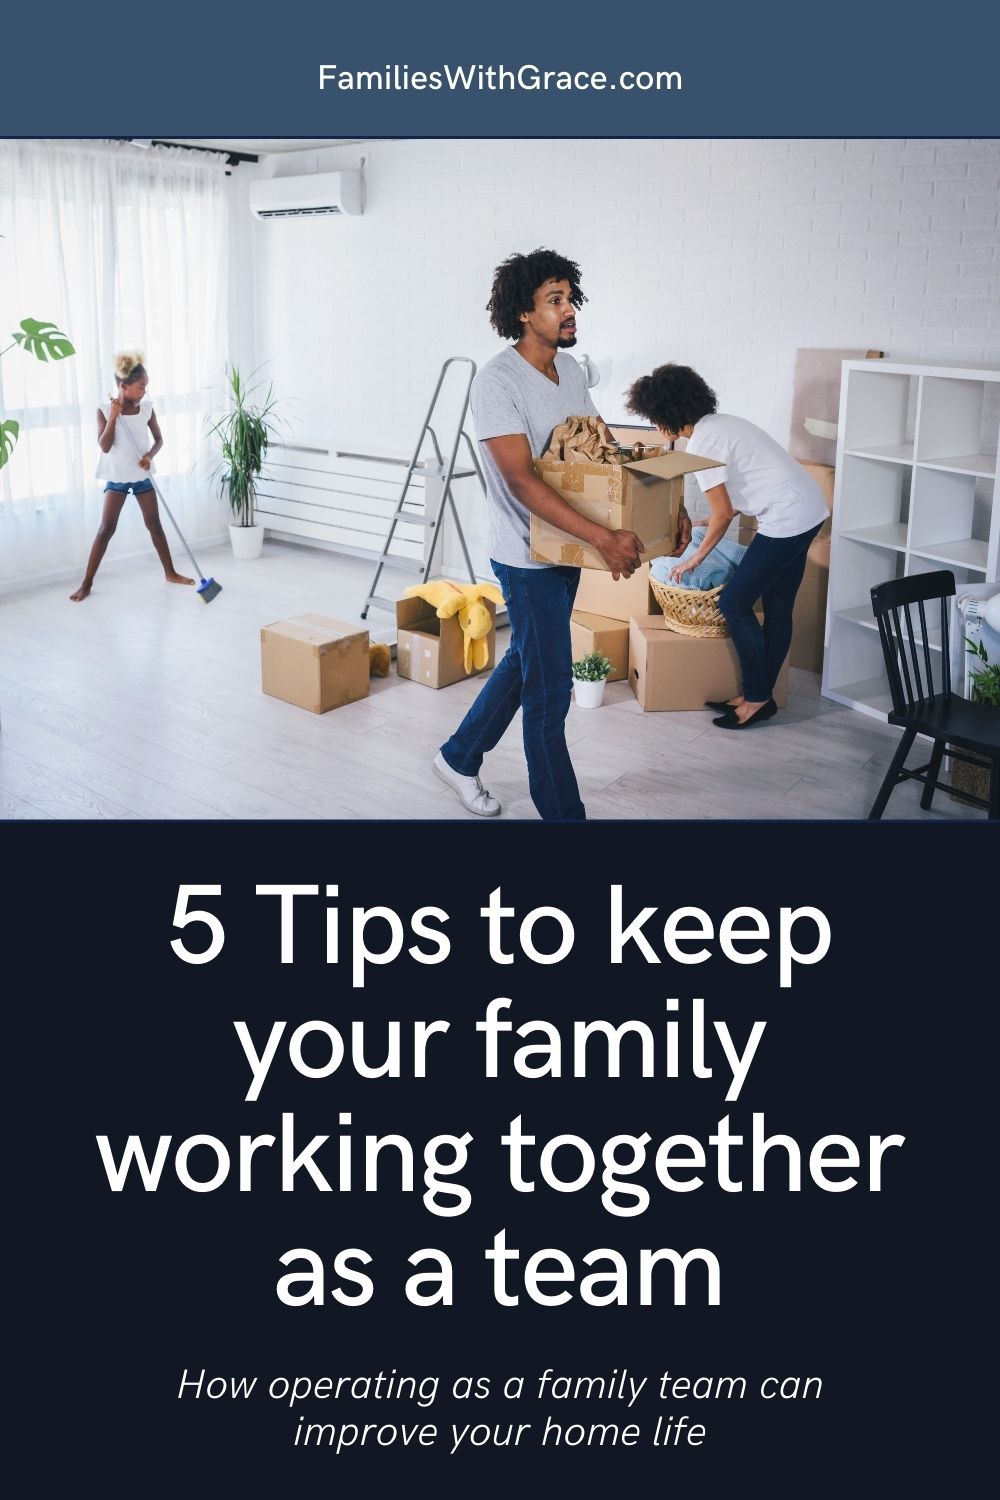 5 Tips to keep your family working together as a team